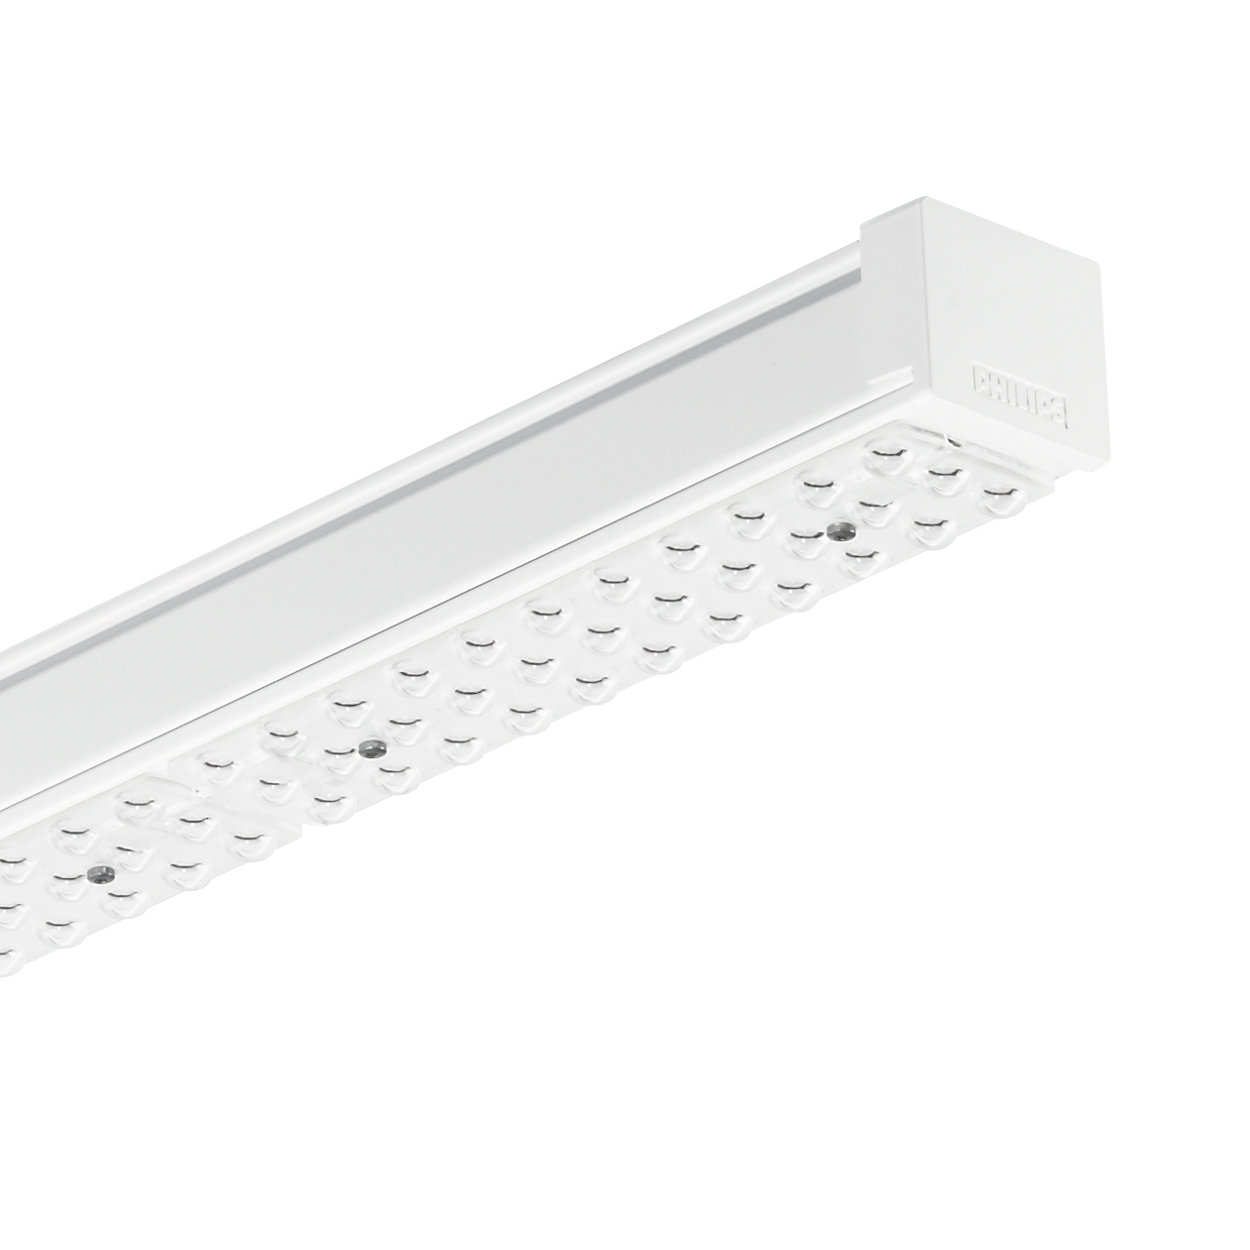 Maxos LED inserts for TTX400 – efficiency champion with great payback